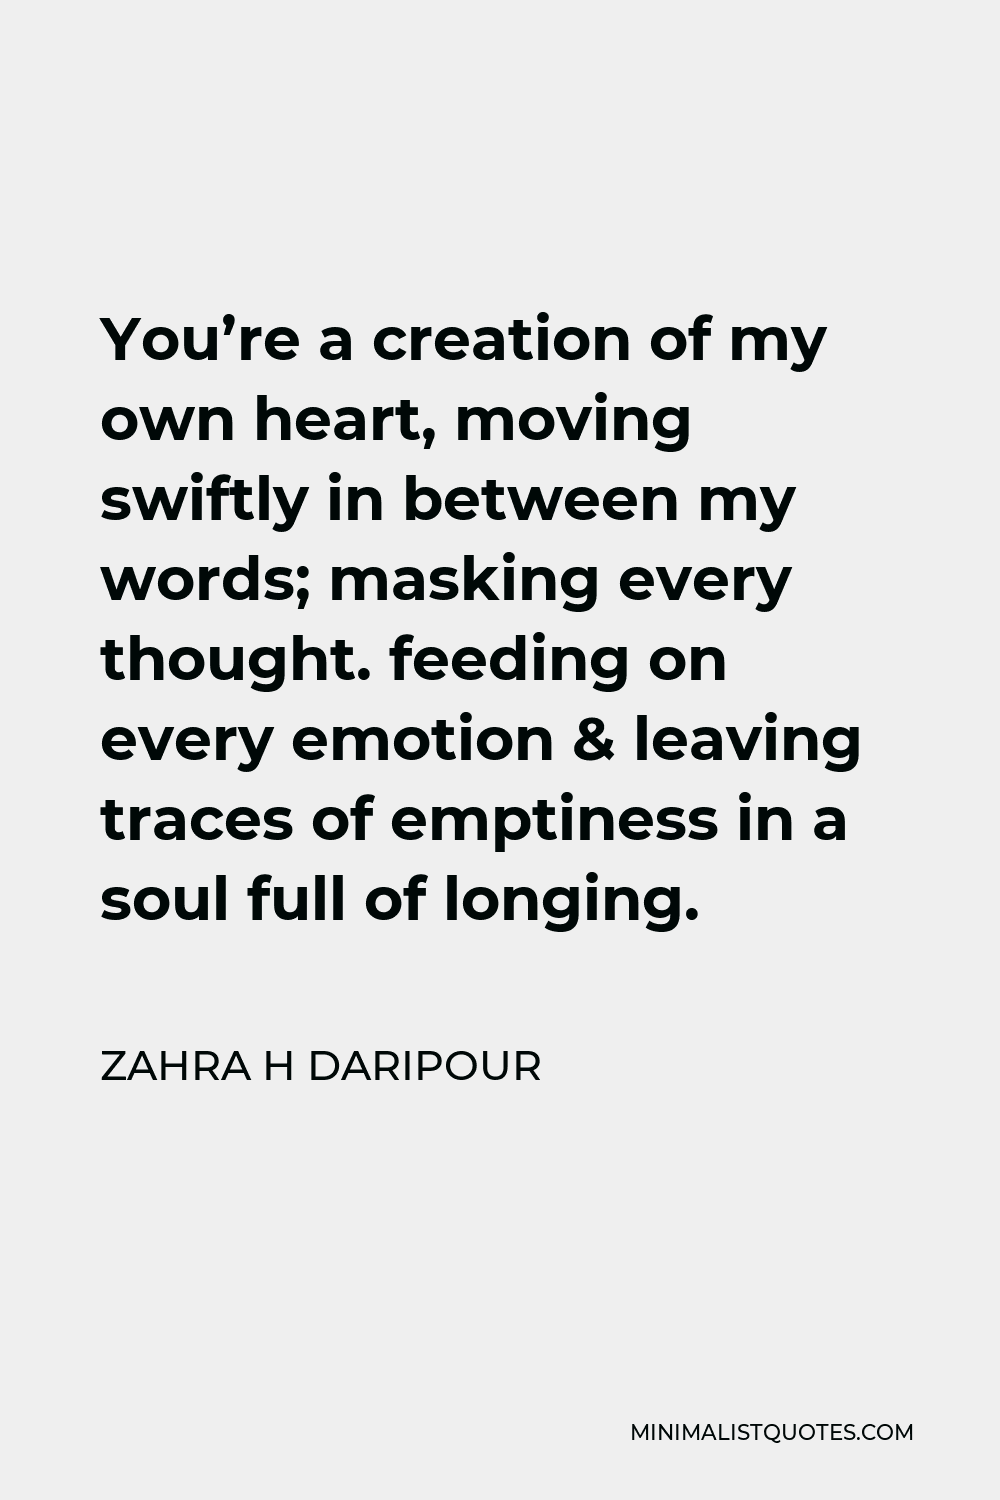 Zahra H Daripour Quote - You’re a creation of my own heart, moving swiftly in between my words; masking every thought. feeding on every emotion & leaving traces of emptiness in a soul full of longing.